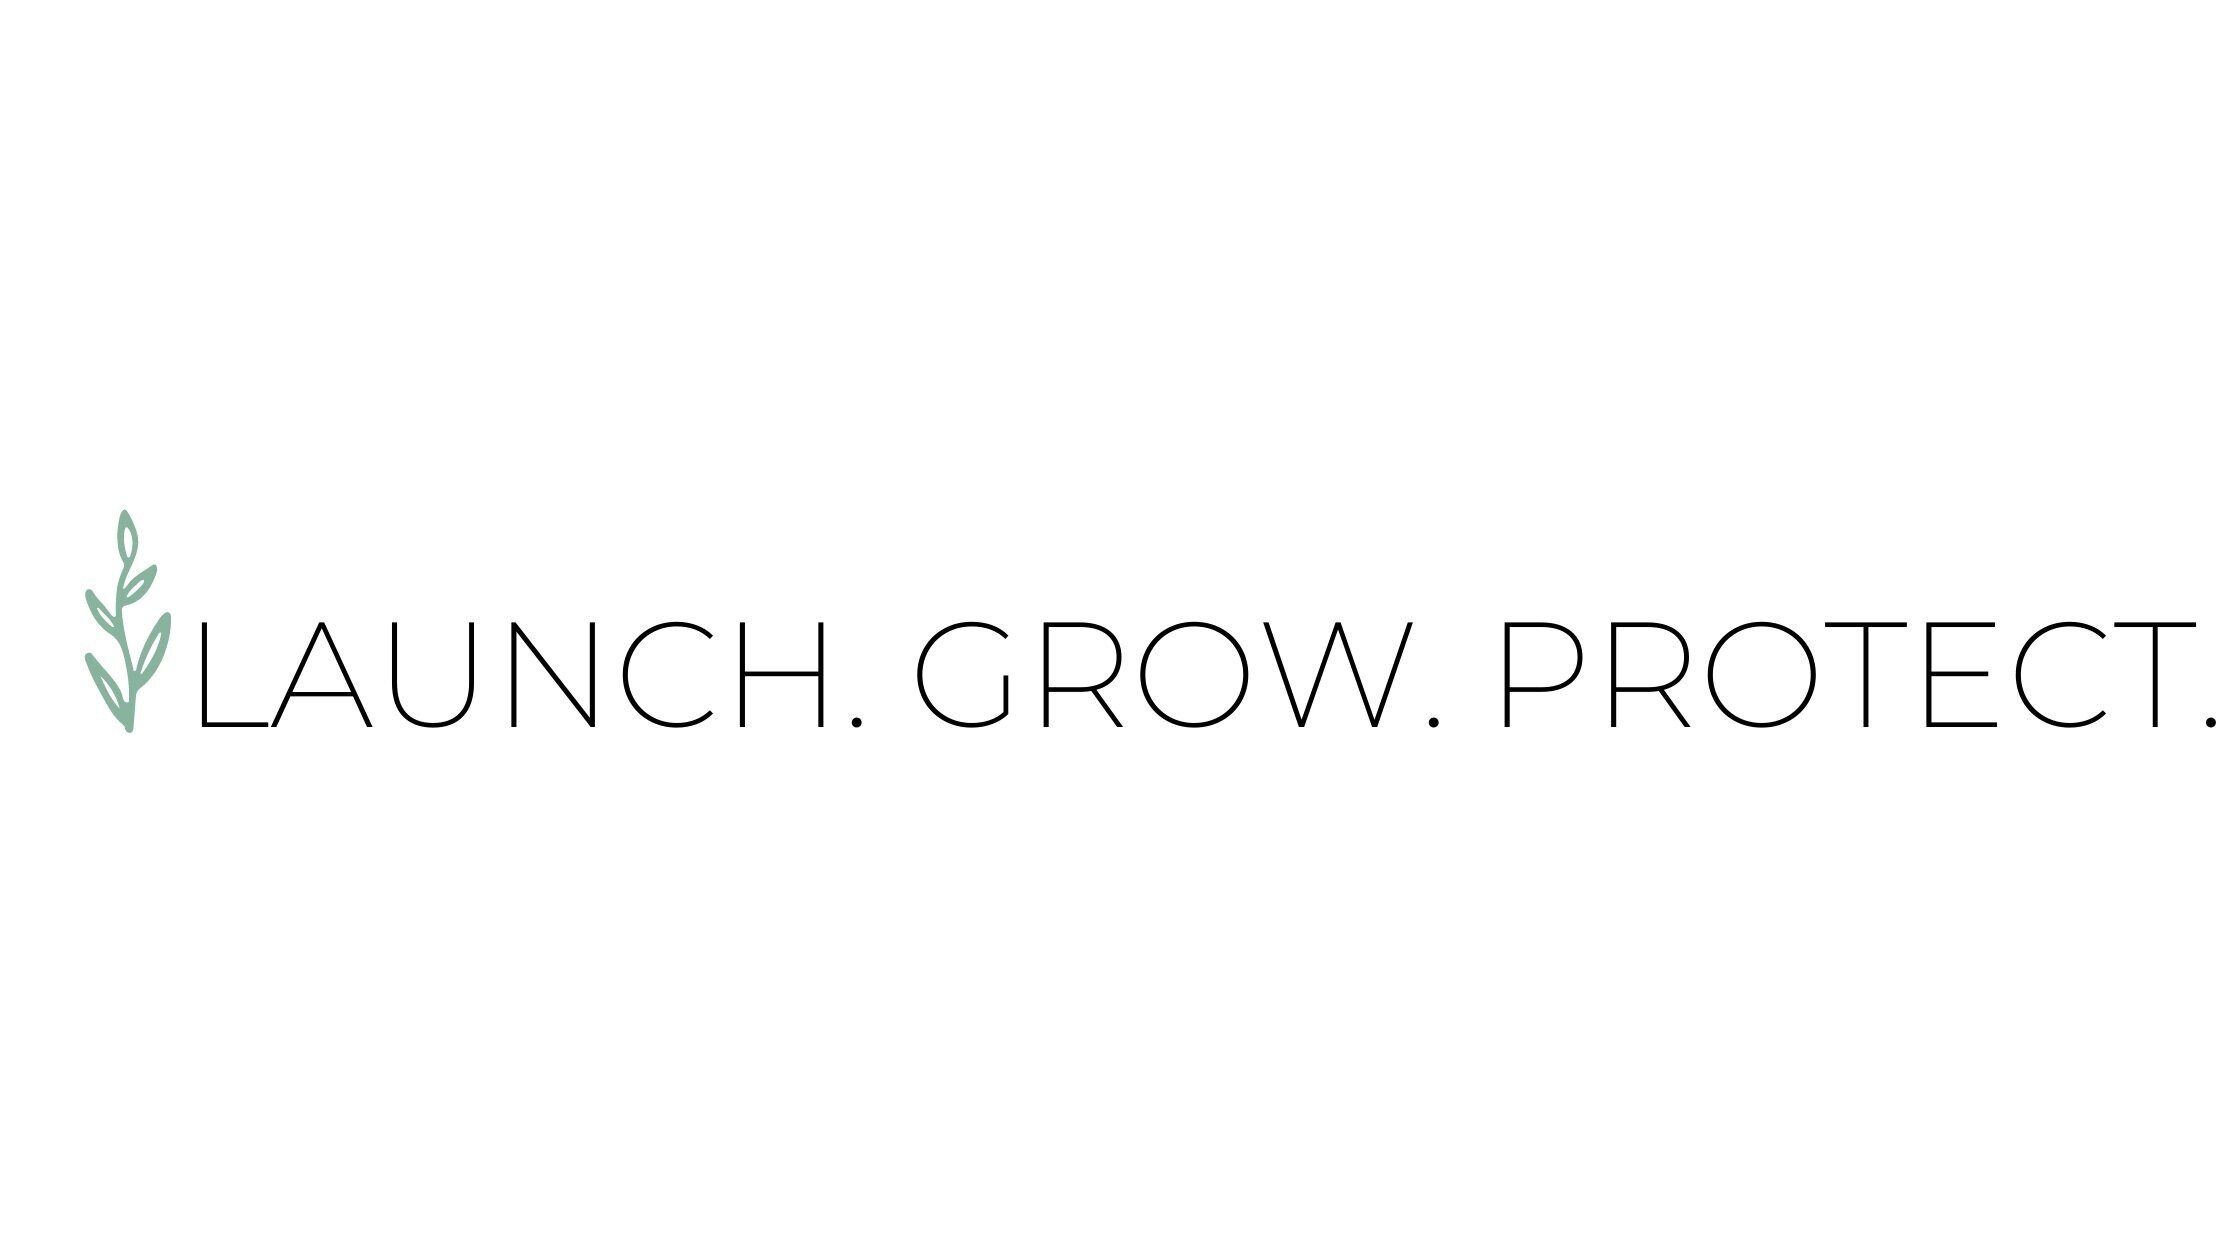 Launch. Grow. Protect.